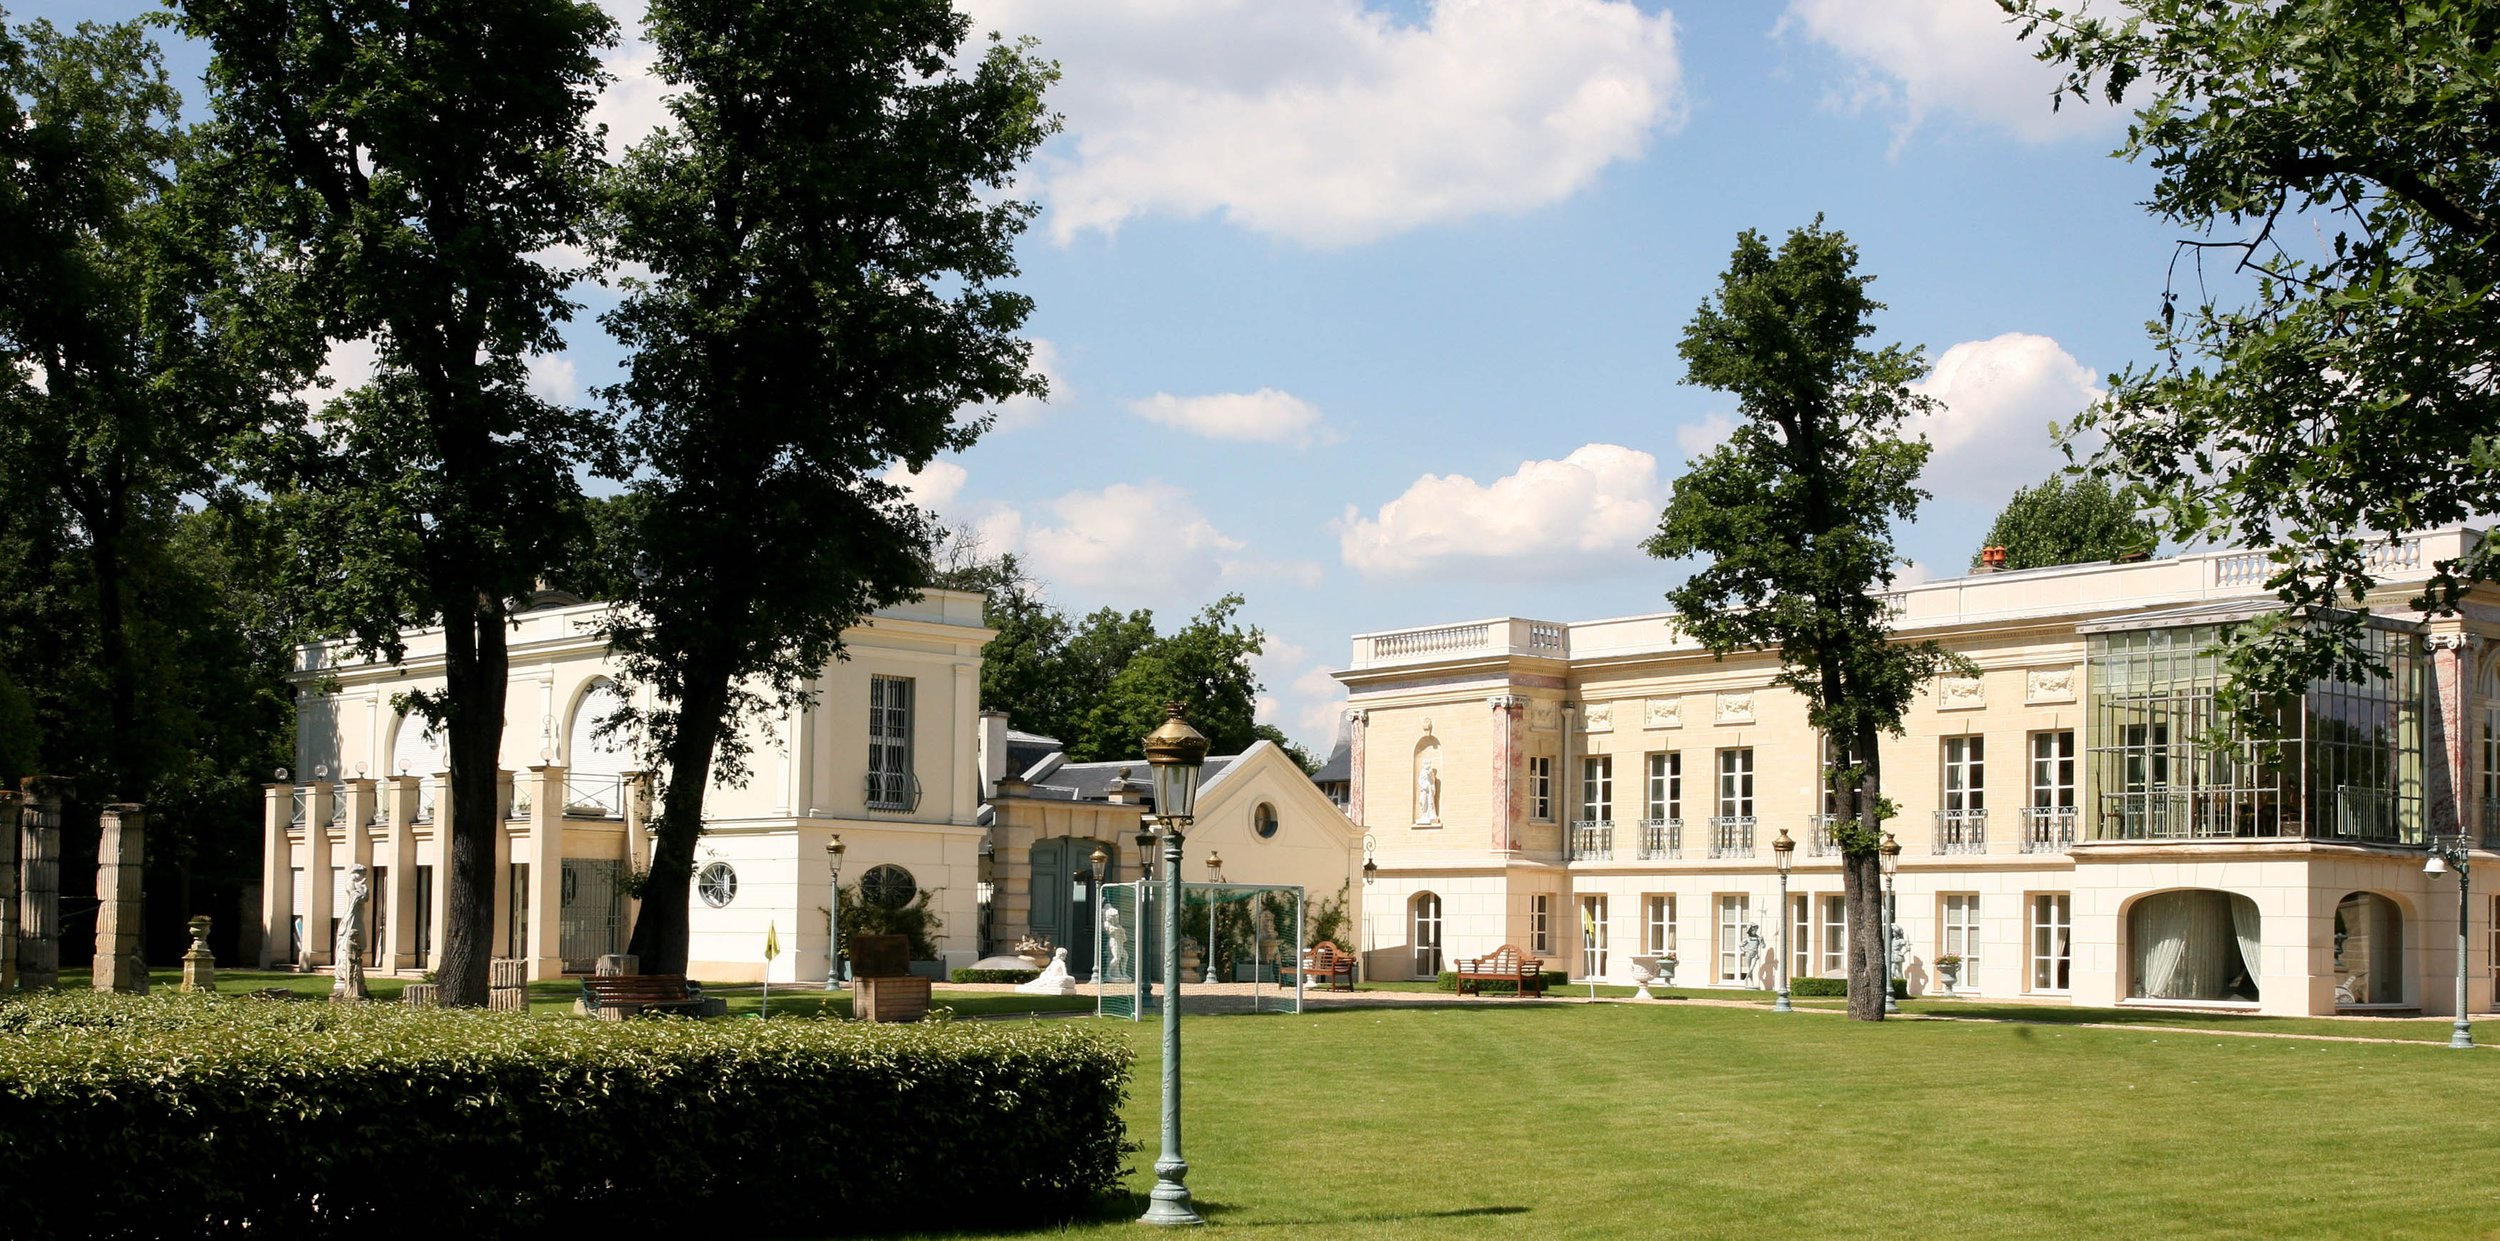 Francis York Grand Trianon-Inspired Palace, 20 Minutes West of Paris 6.jpg